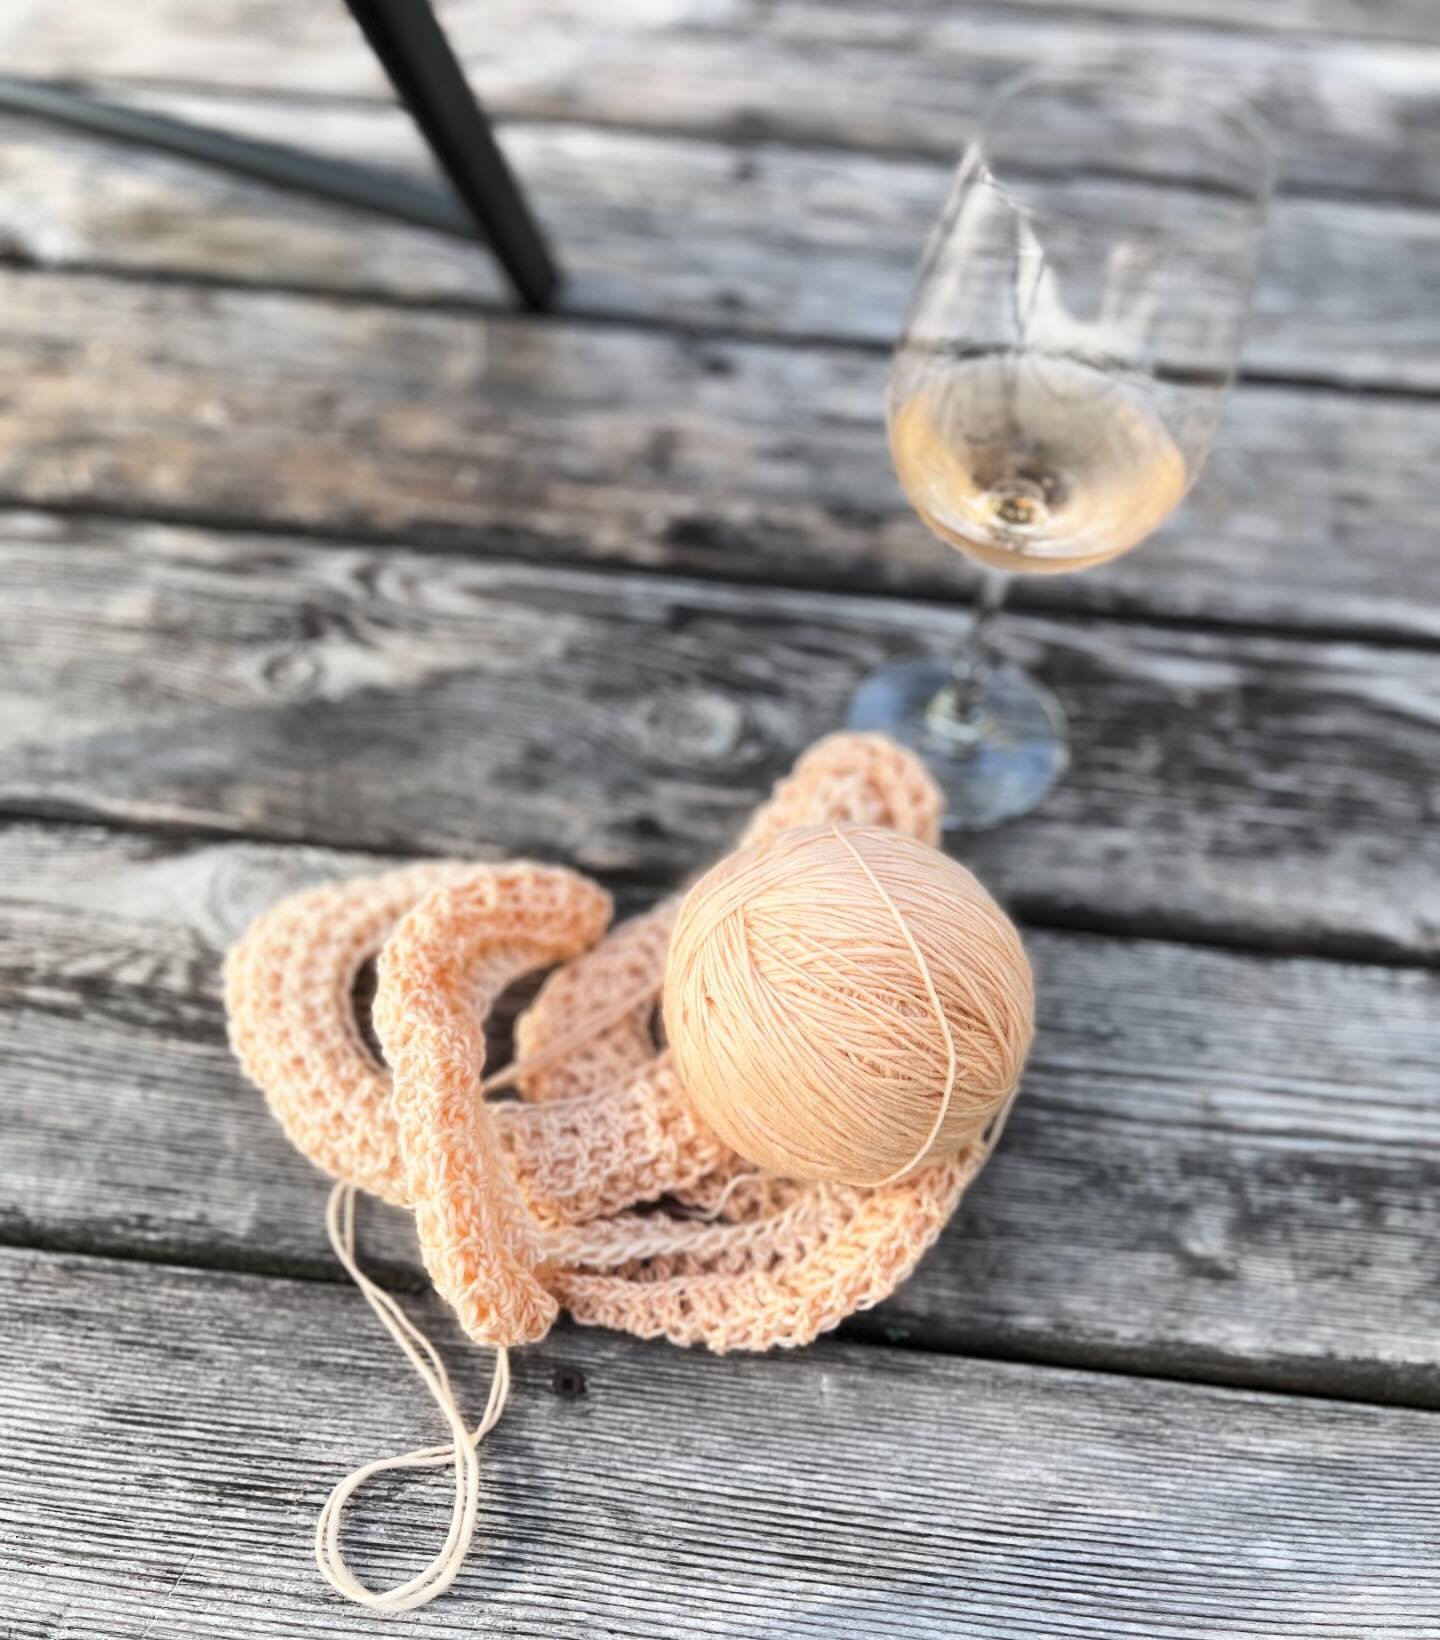 Our Crochet-a-long doesn&rsquo;t start until next week, but I just couldn&rsquo;t wait to get started on my cowl! A frosty glass of rose seemed like the perfect match for this peachy-pink ombr&eacute; yarn. Cheers to the first warm spring evening on 